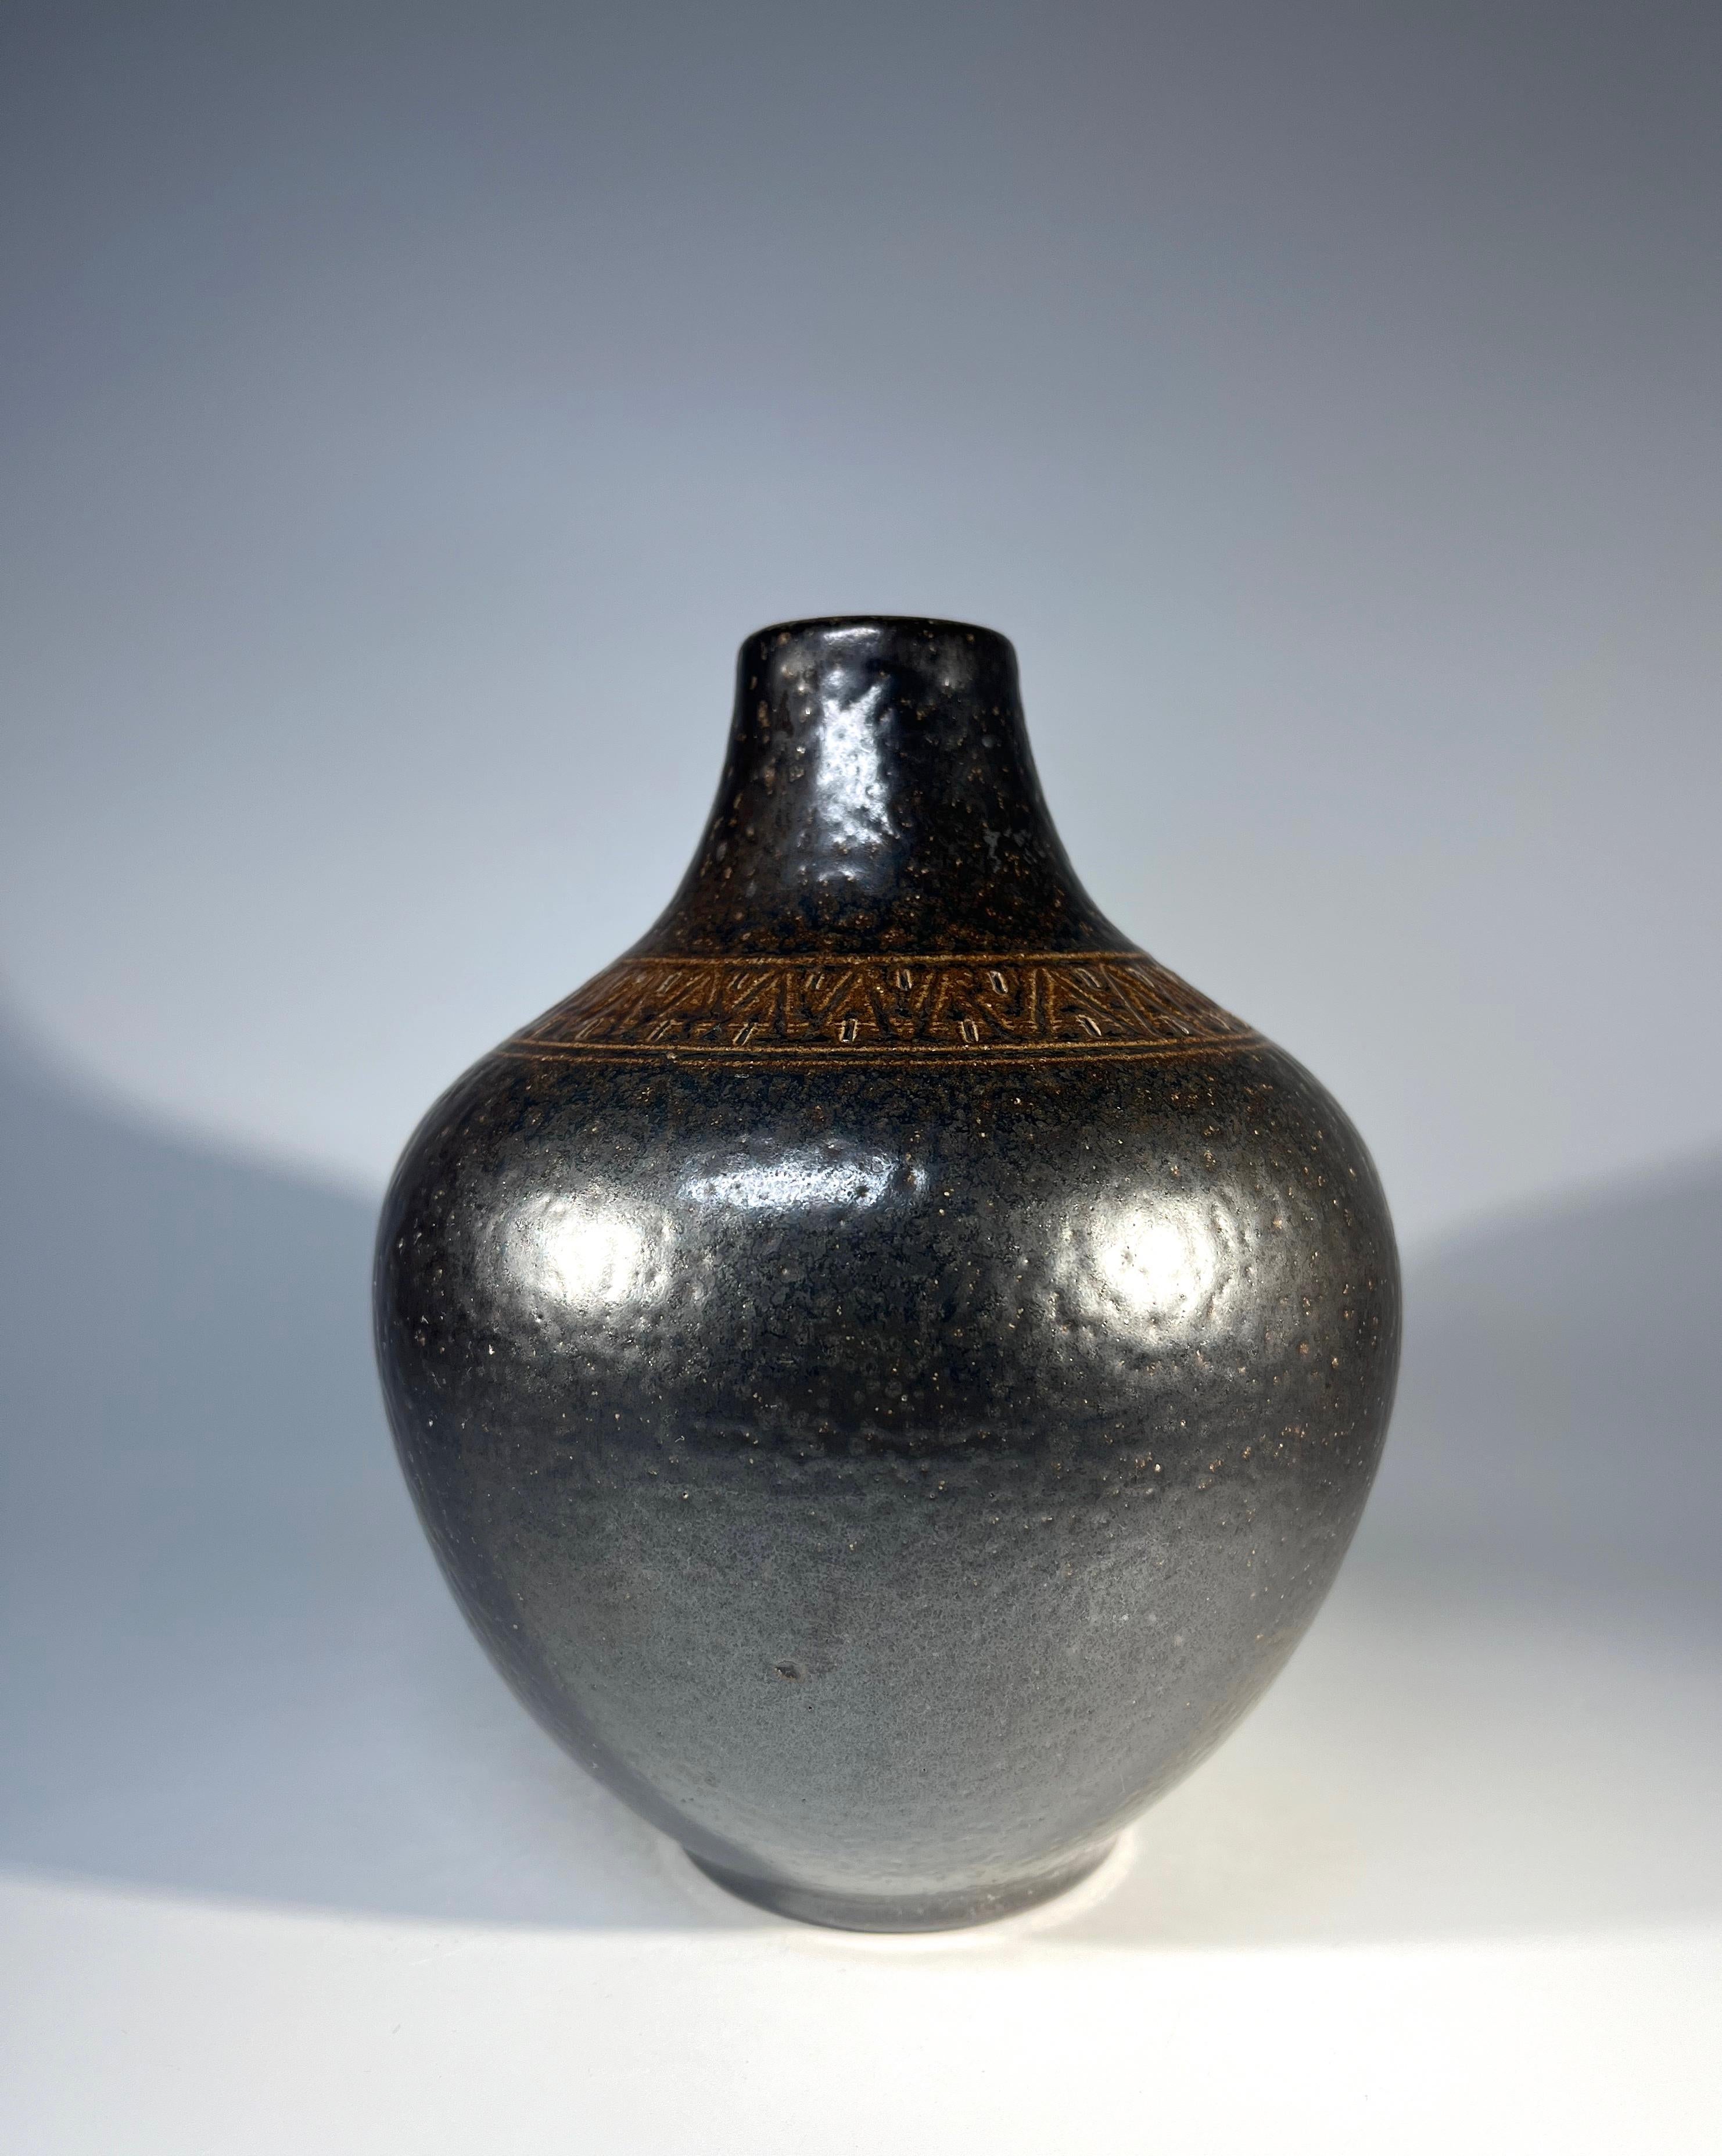 Formidable stoneware vase by Arthur Andersson for Wallåkra of Sweden
Defined shape with an incised collar decoration, orange peel textured dark brown glaze
Circa 1950's
Signed Wallåkra to base
Height 6.75 inch, Diameter 5.5 inch
Excellent